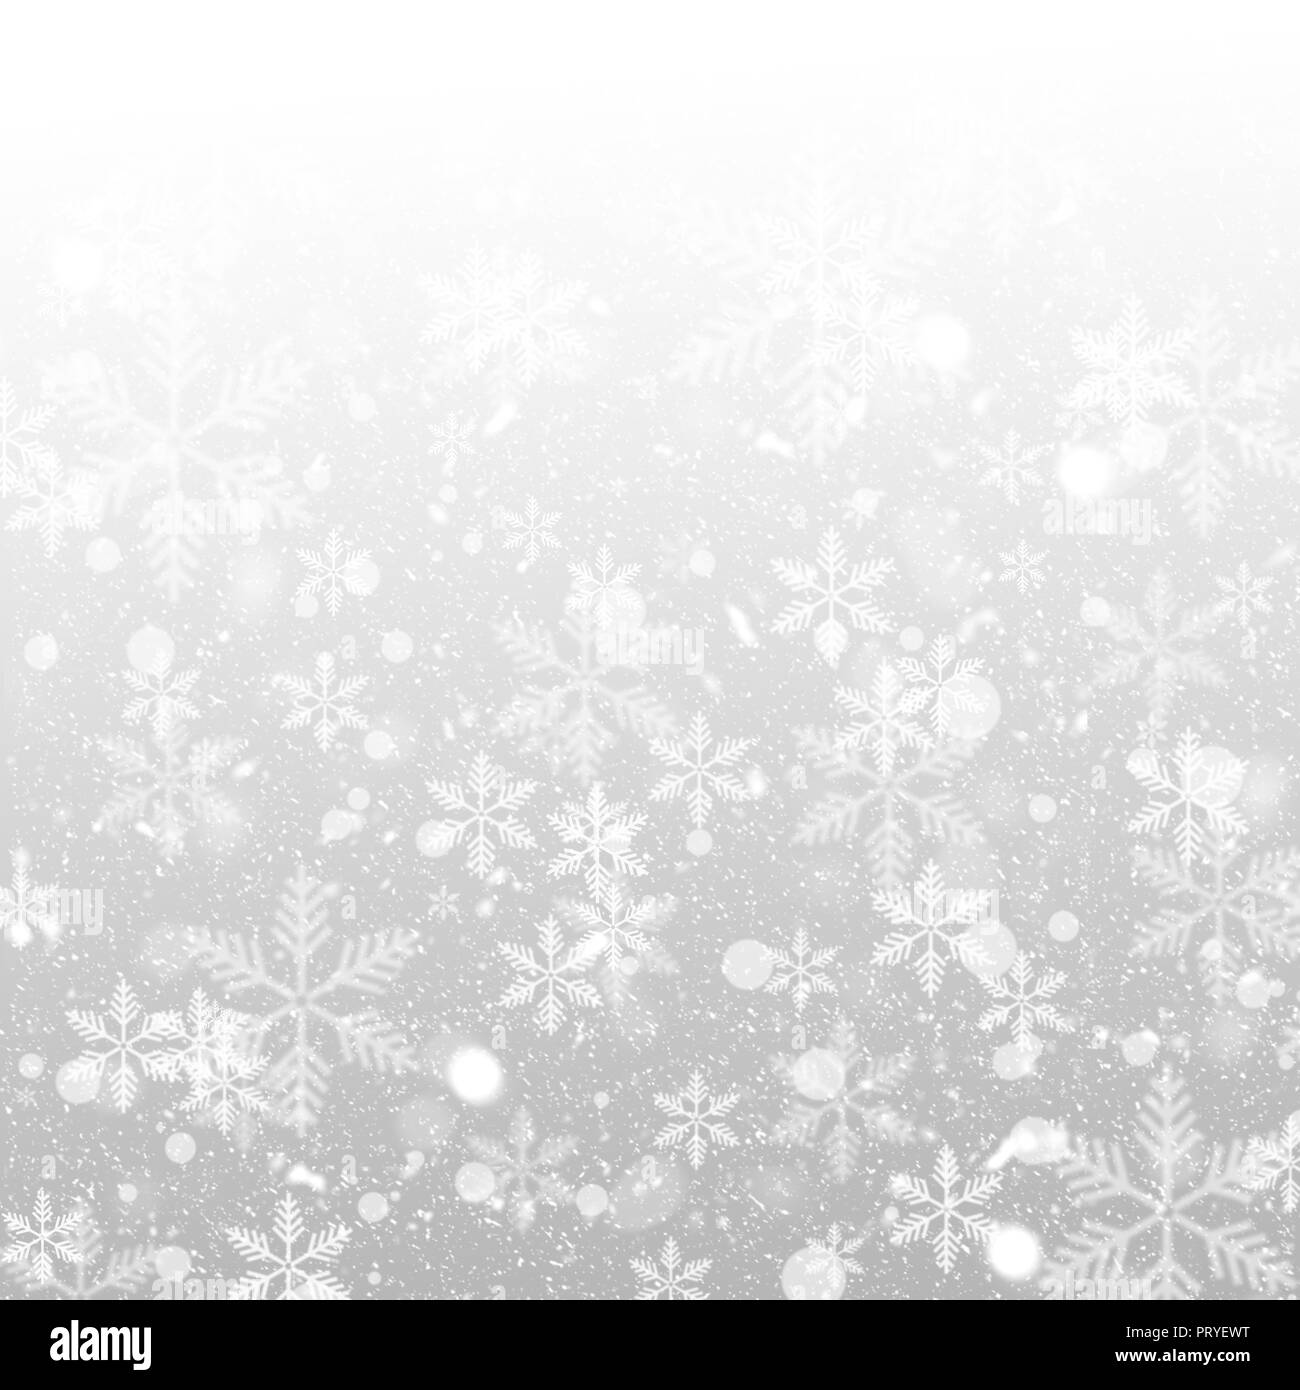 Abstract Snowflakes Holiday Background Stock Photo